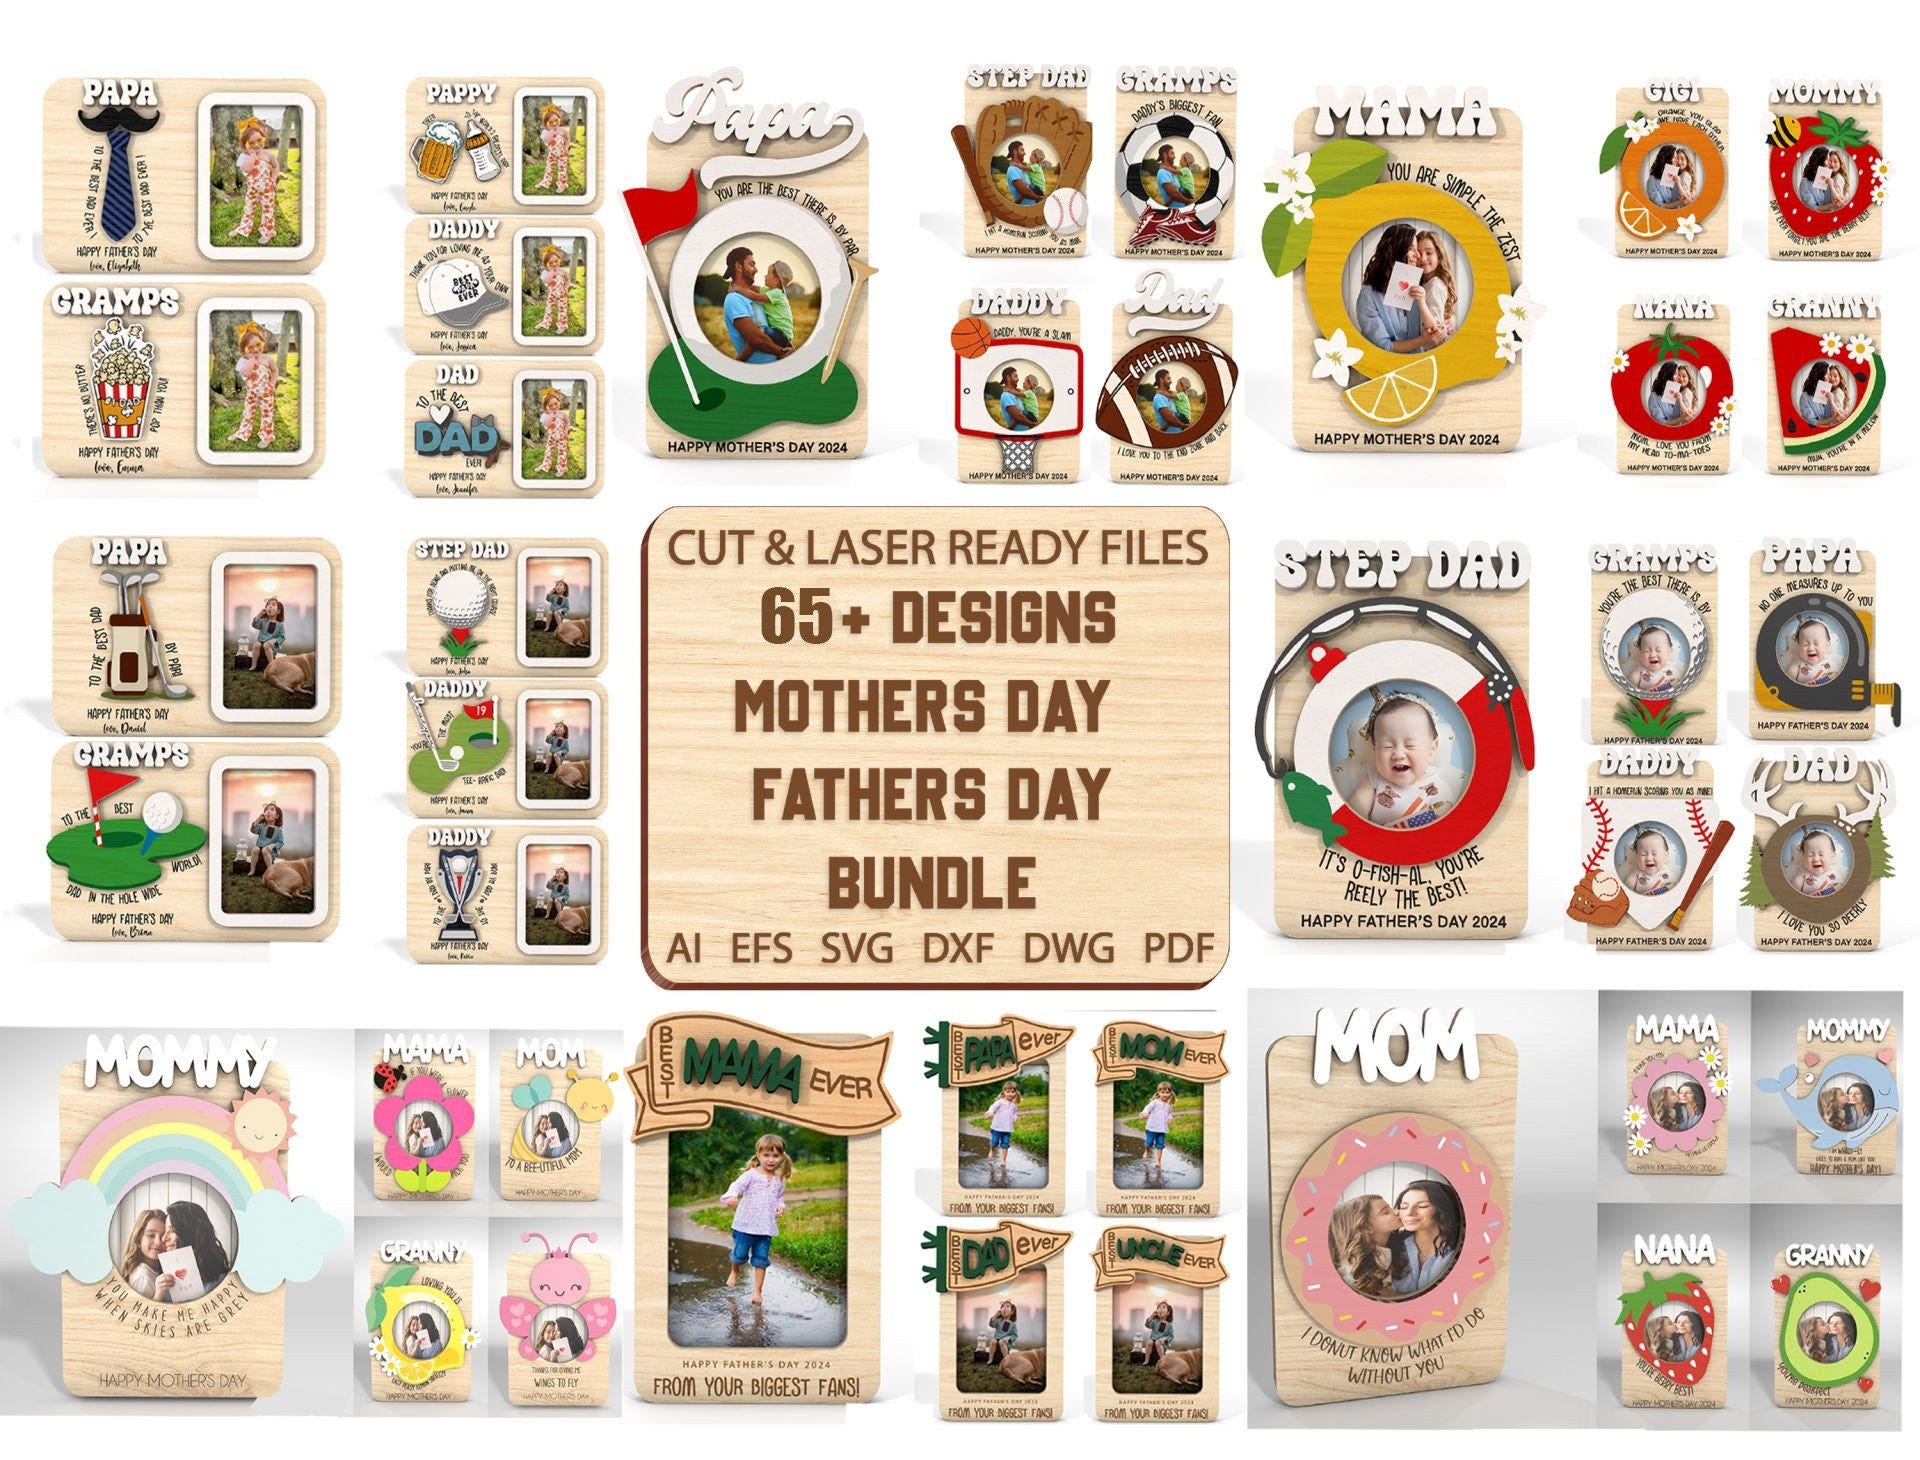 Bundle 60+ Mother‘s Day, Father’s Day Photo Frame Magnet,Mother‘s Day Gift,Father’s Day Gift ,Mom Fridge Magnet Photo Frame,Laser Ready File